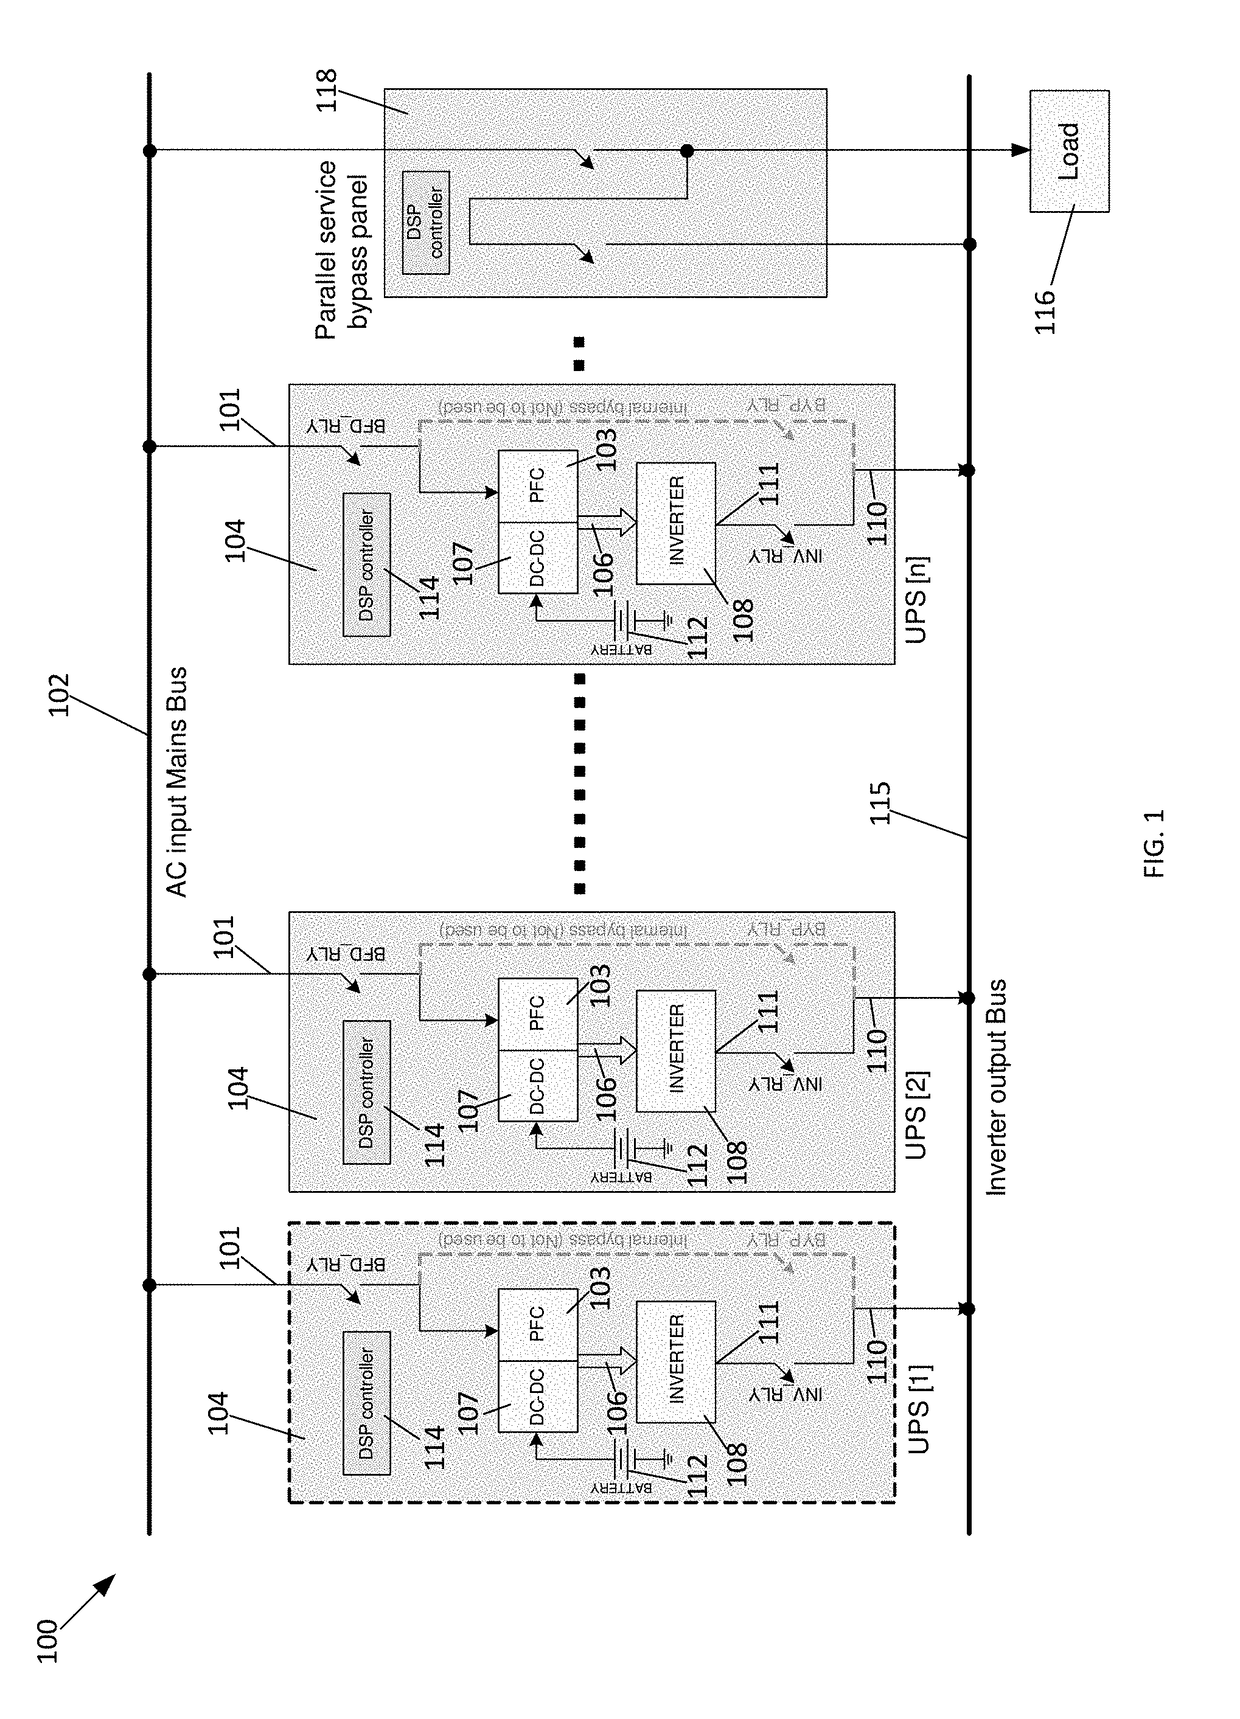 Inverter paralleling control system and method